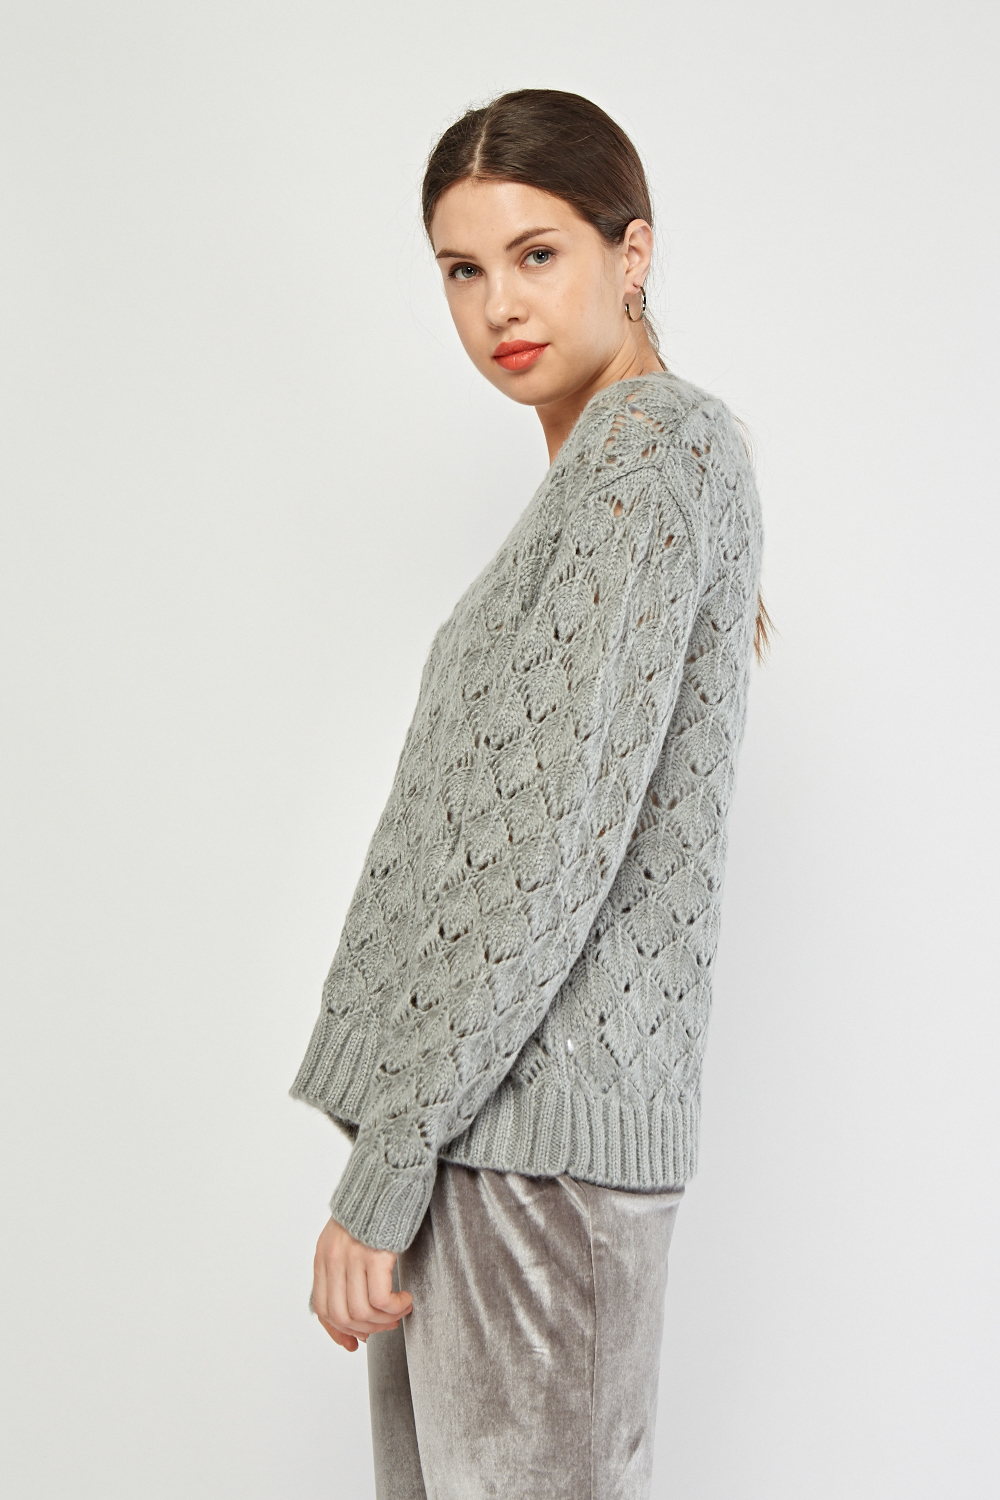 Loose Knit Pattern Sweater - 4 Colours - Just £5